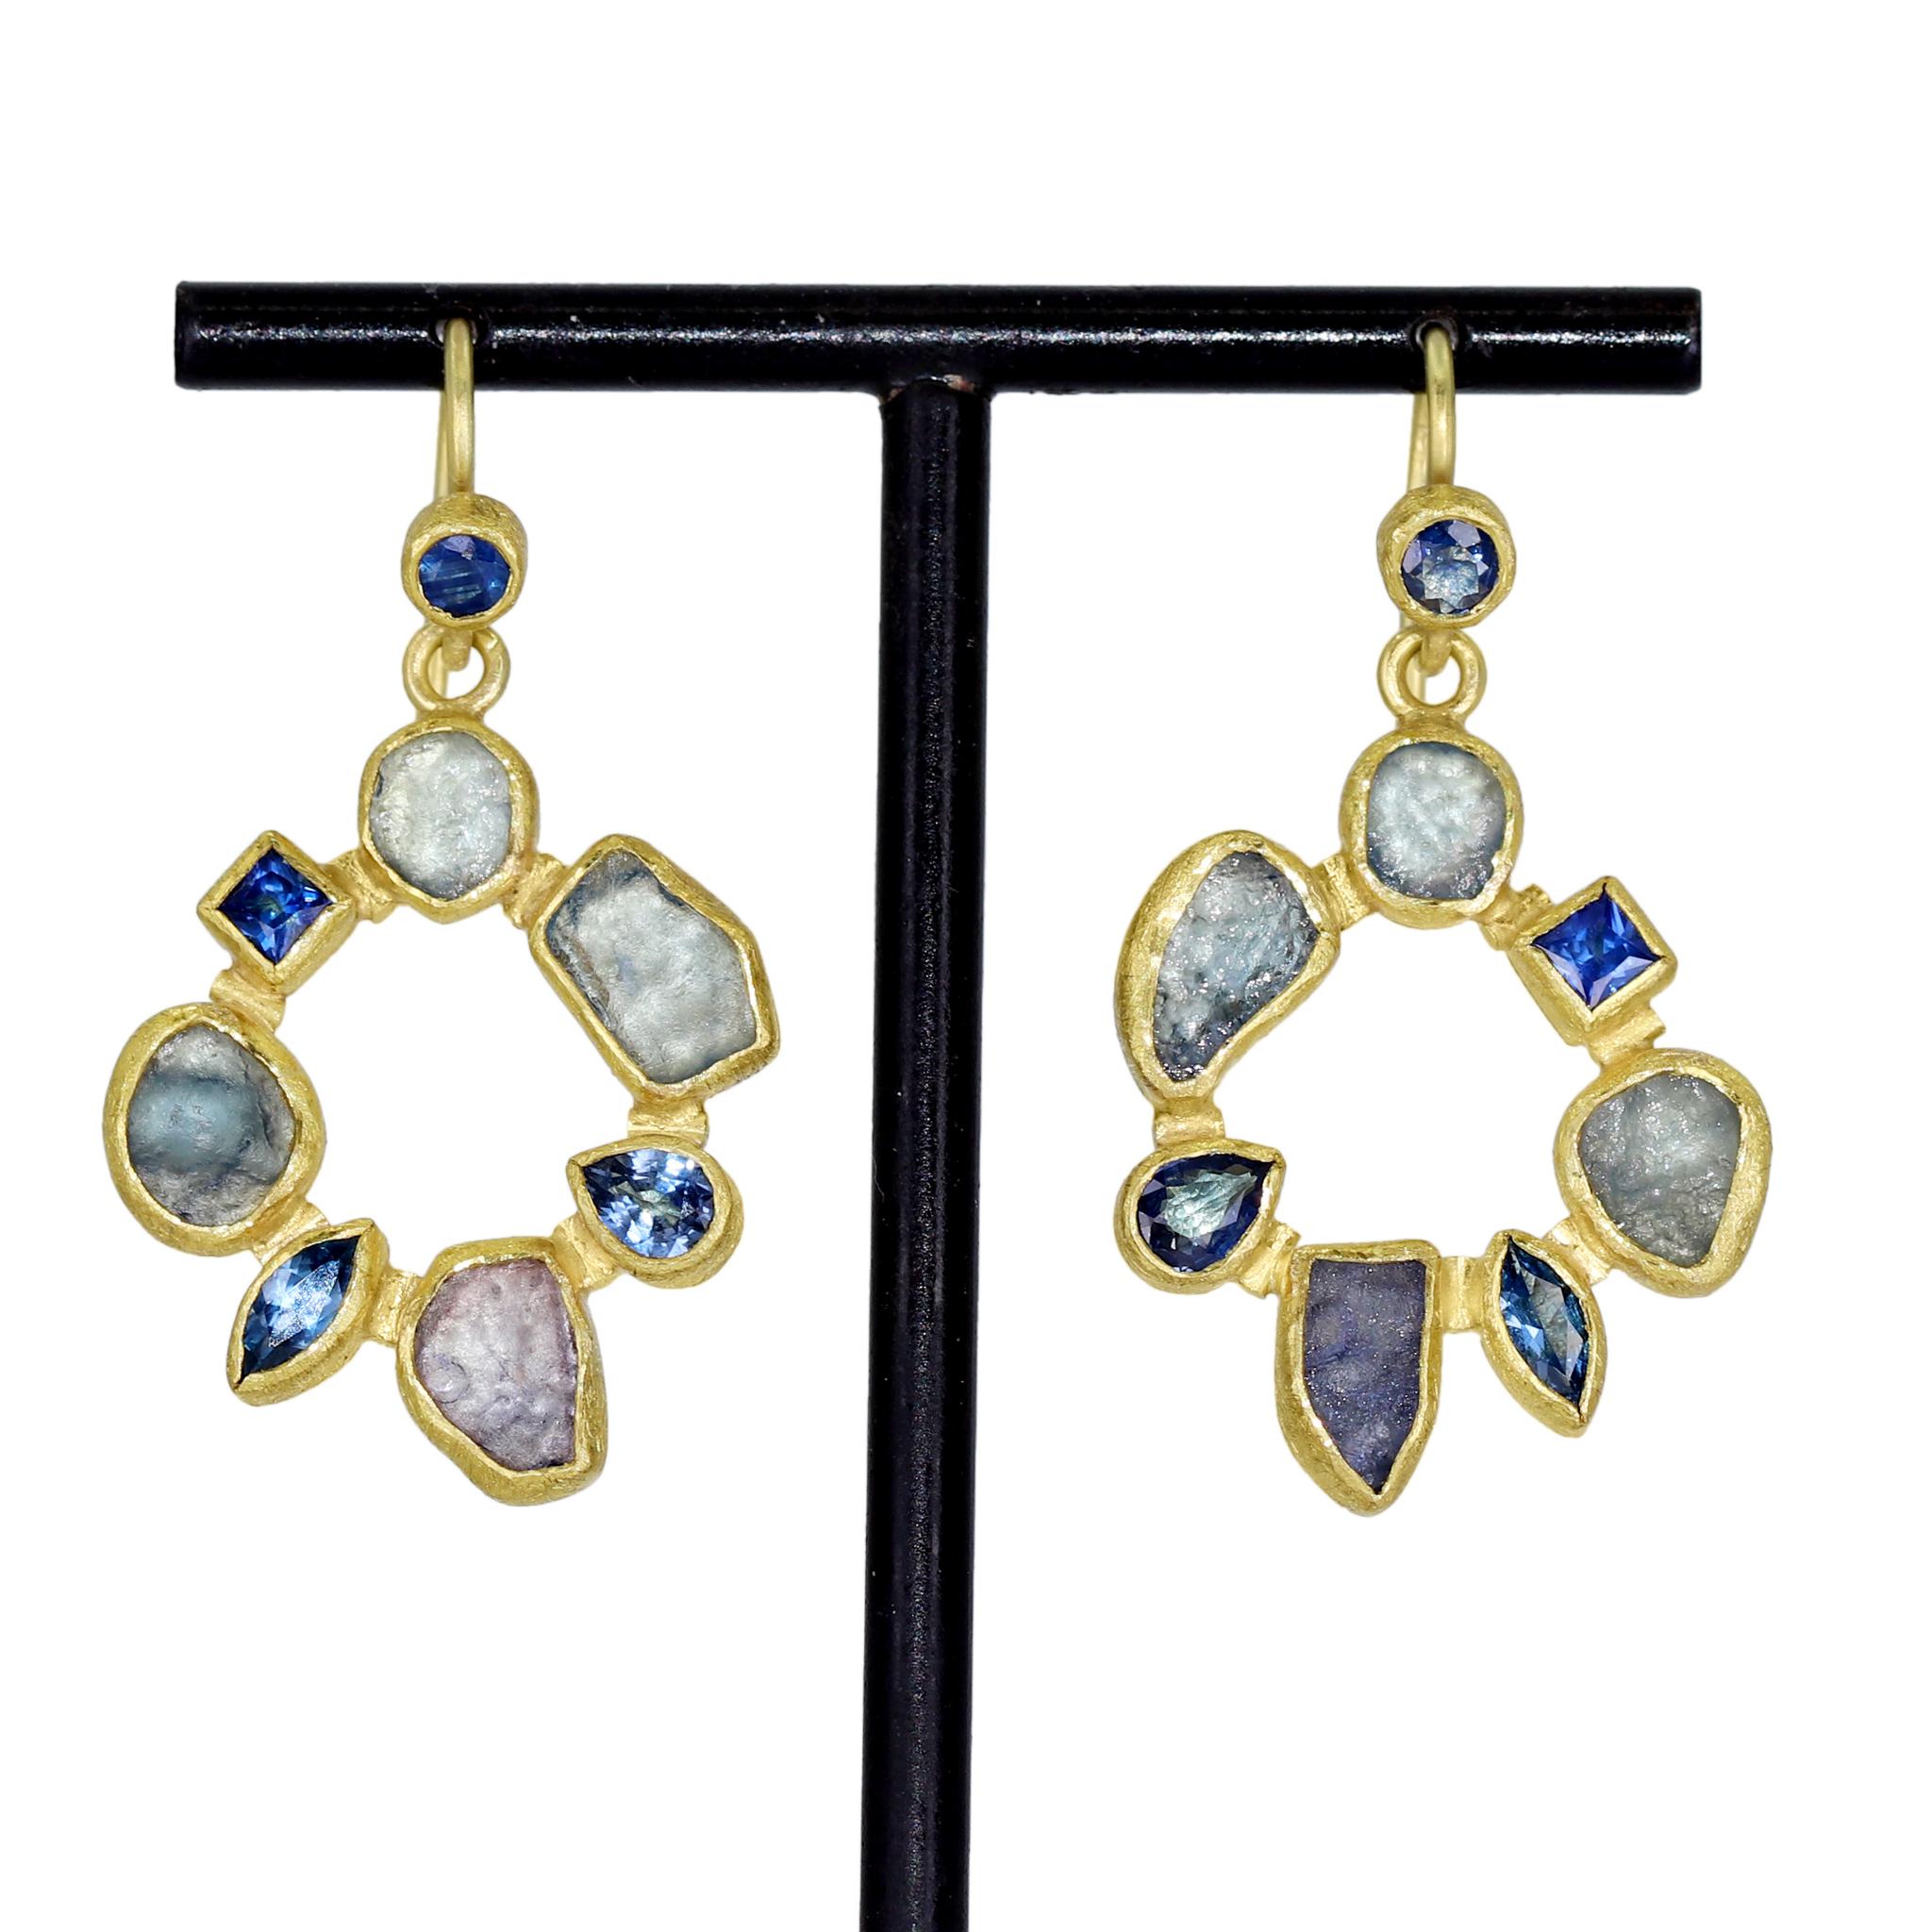 One of a Kind Radial Drop Earrings handcrafted by renowned jewelry maker Petra Class in signature-finished 22k yellow gold, featuring gorgeous faceted and rough natural blue Montana sapphires in an intricate open setting, and finished on round blue